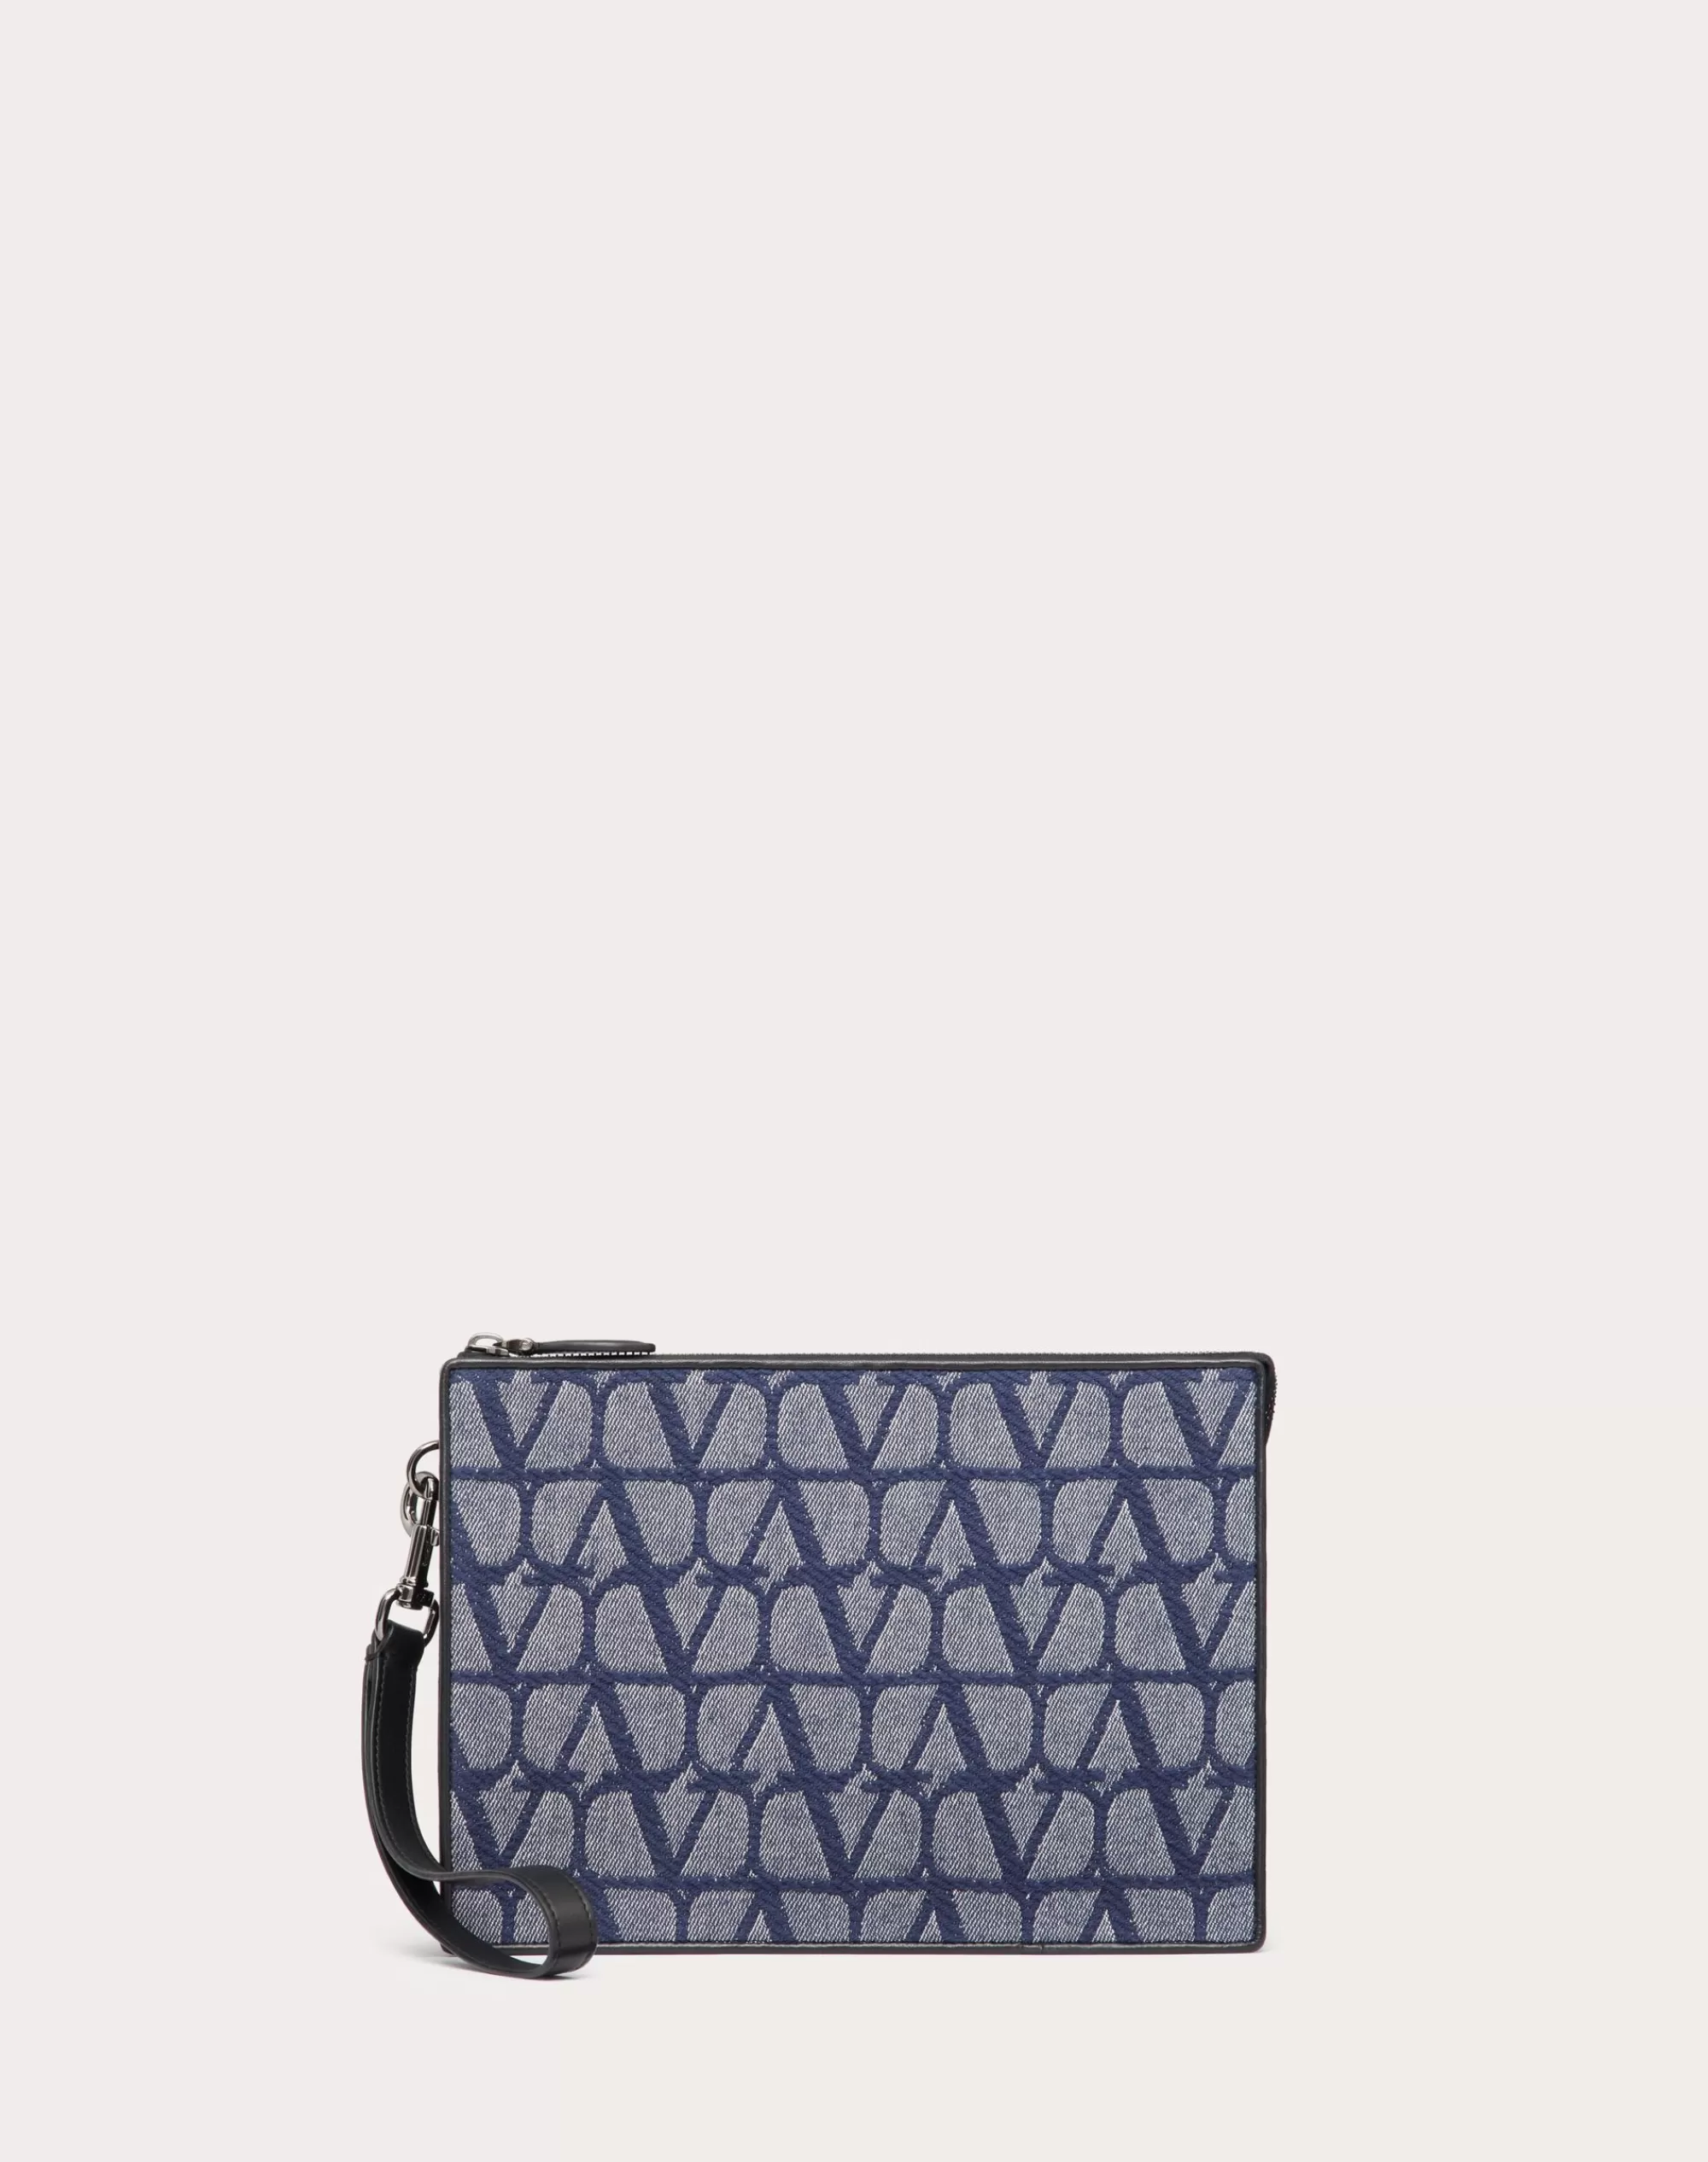 Valentino TOILE ICONOGRAPHE POUCH IN DENIM-EFFECT JACQUARD FABRIC WITH LEATHER DETAILS Denim/black Clearance